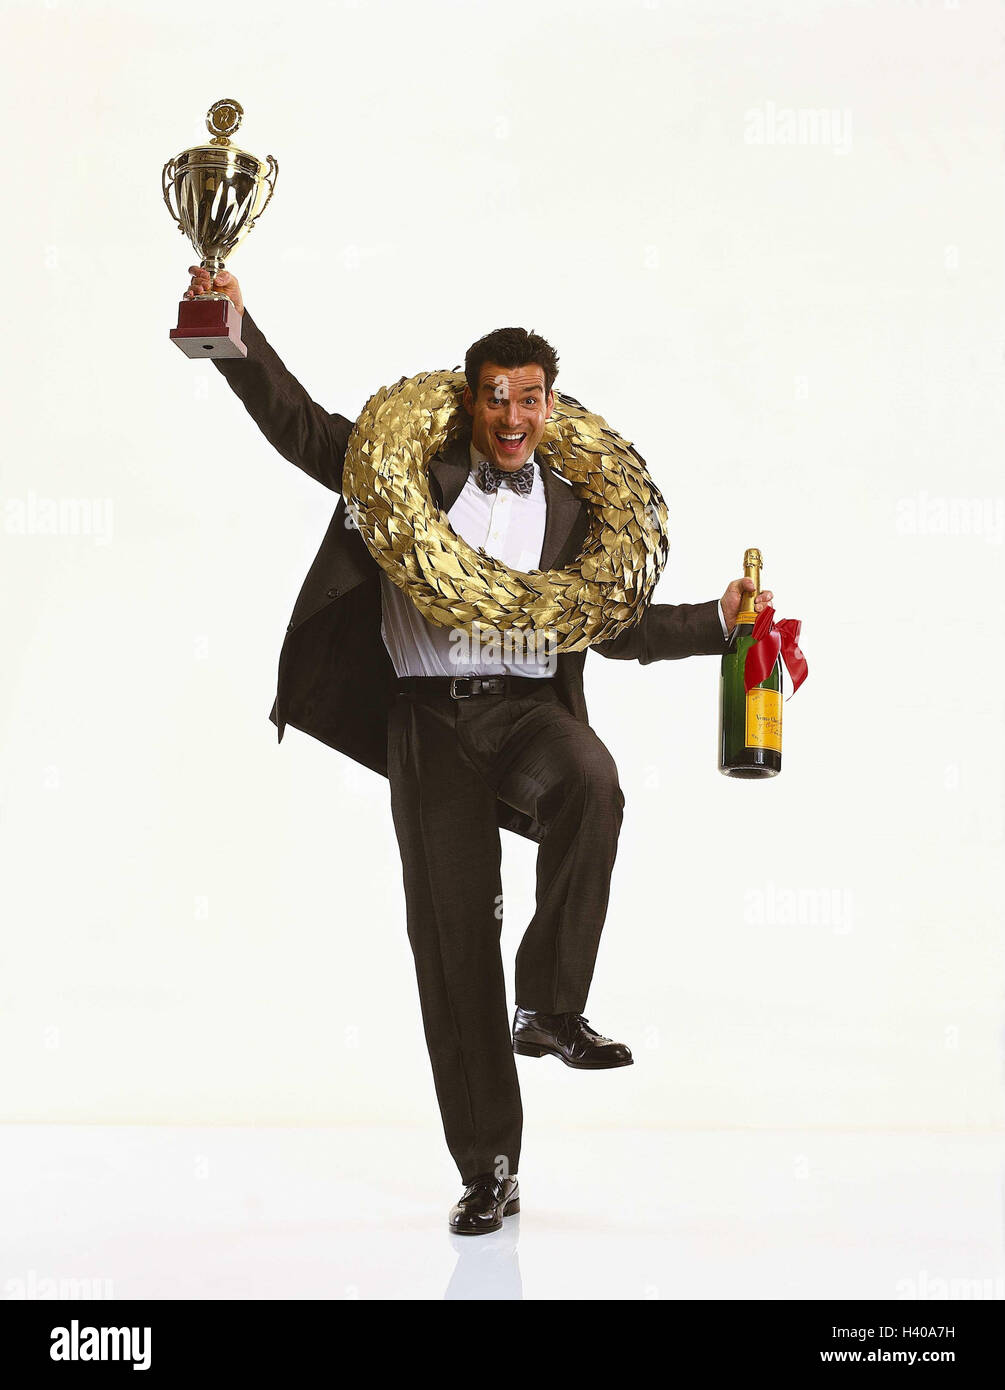 Businessman, young, winner's rim, cup, champagnes, gesture, cheering, success Men, winner, first, best, victory, man, manager, suit, laugh, joy, rejoice, happy, winners, melted, victory trophy, Bottle, hold up, studio, cut out Stock Photo